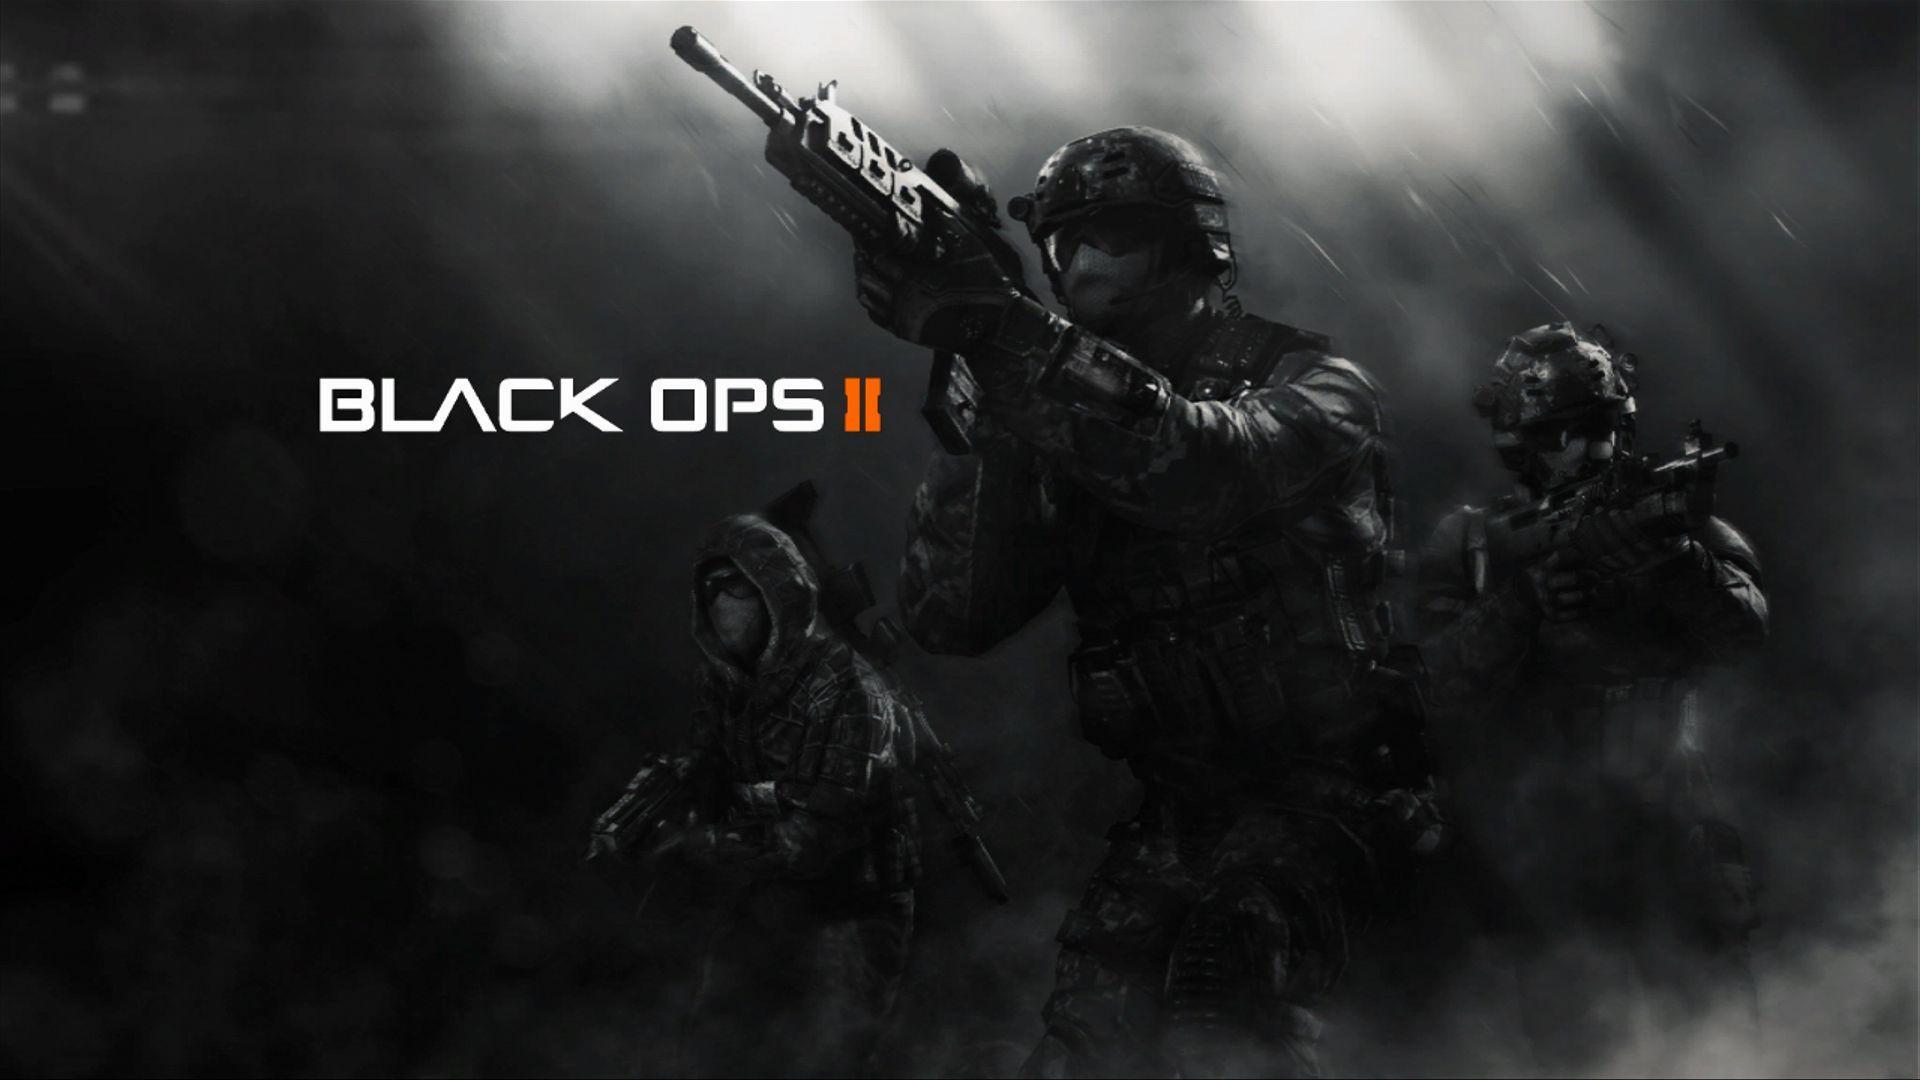 PC Call Of Duty Black Ops 2 Awesome Wallpaper (B.SCB)